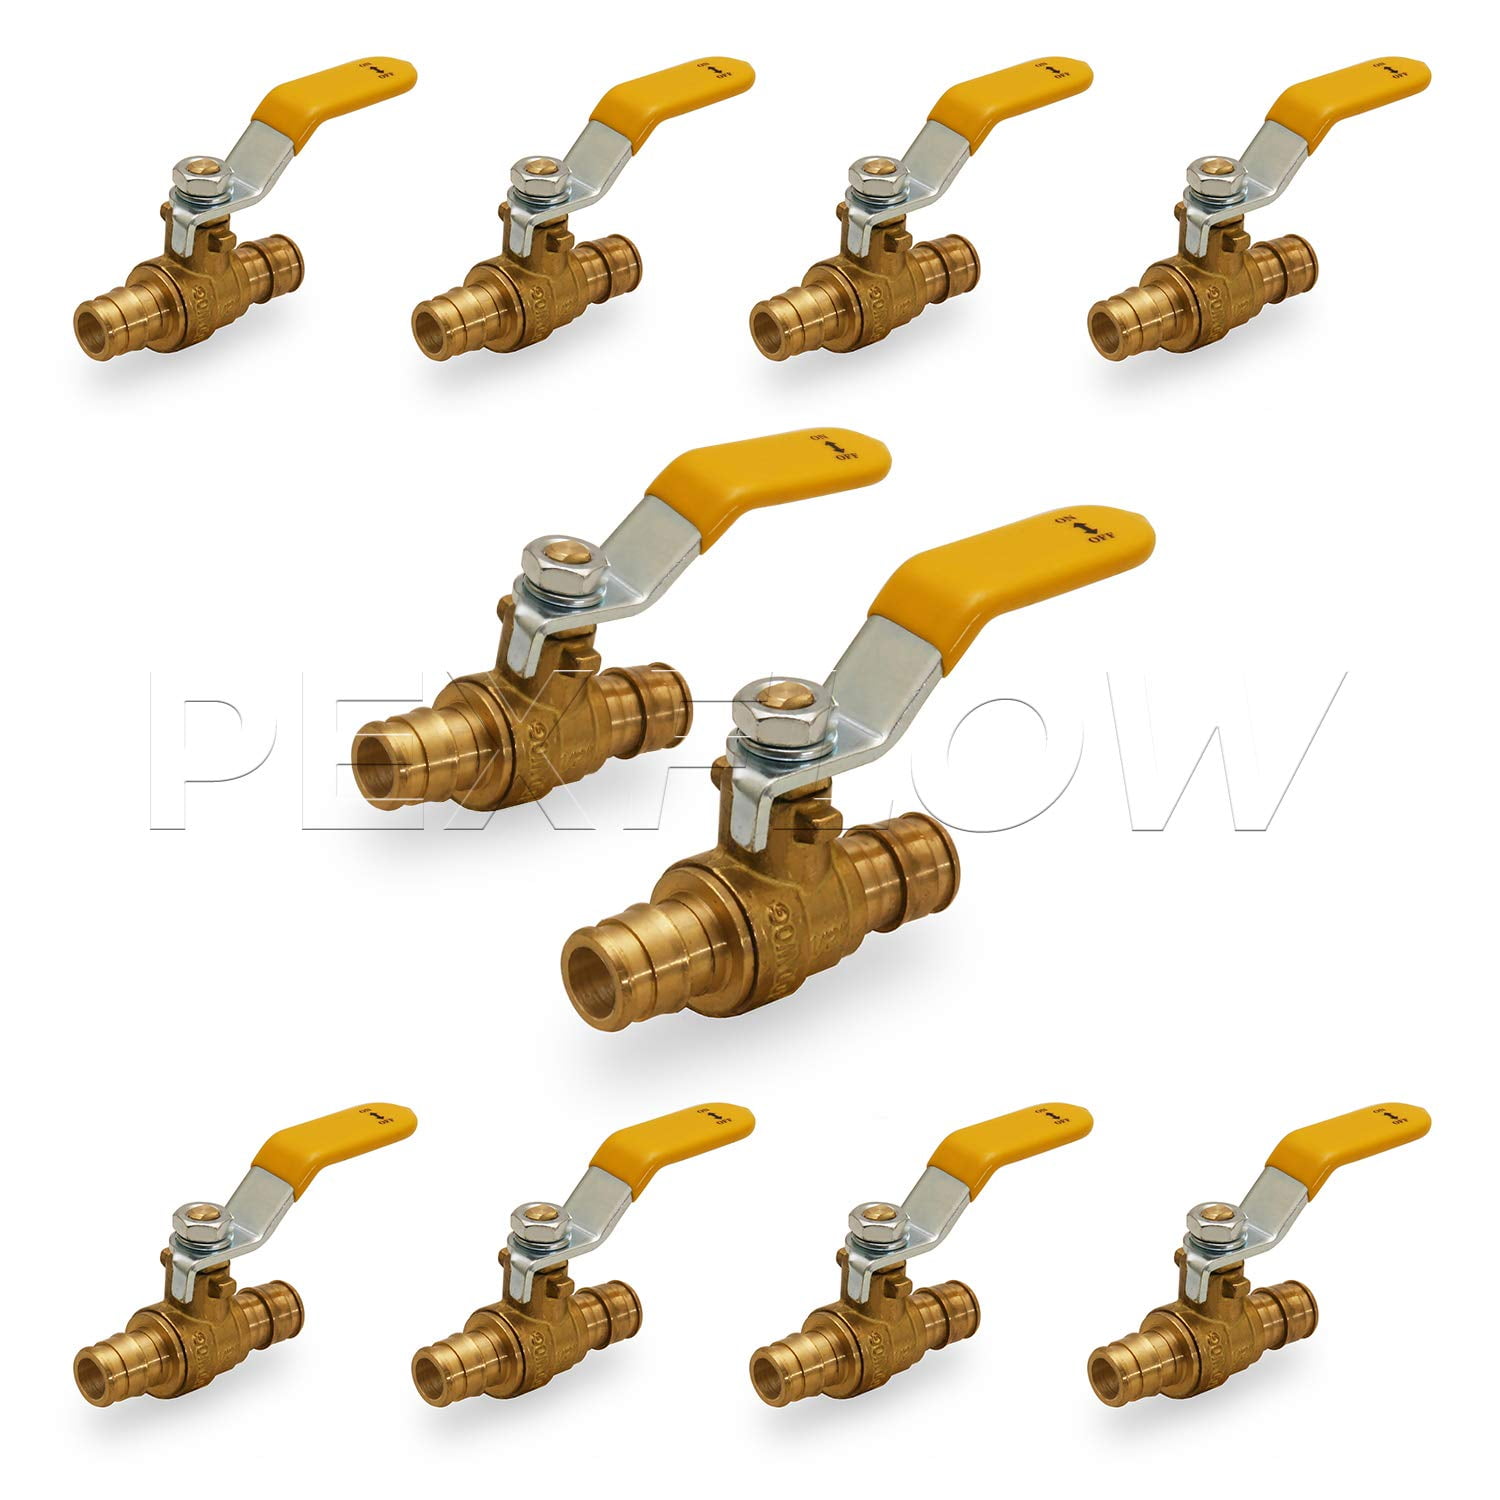 Pexflow Heavy Duty Full Port PEX Ball Valve with SWT x PEX Connection 10 Pack 